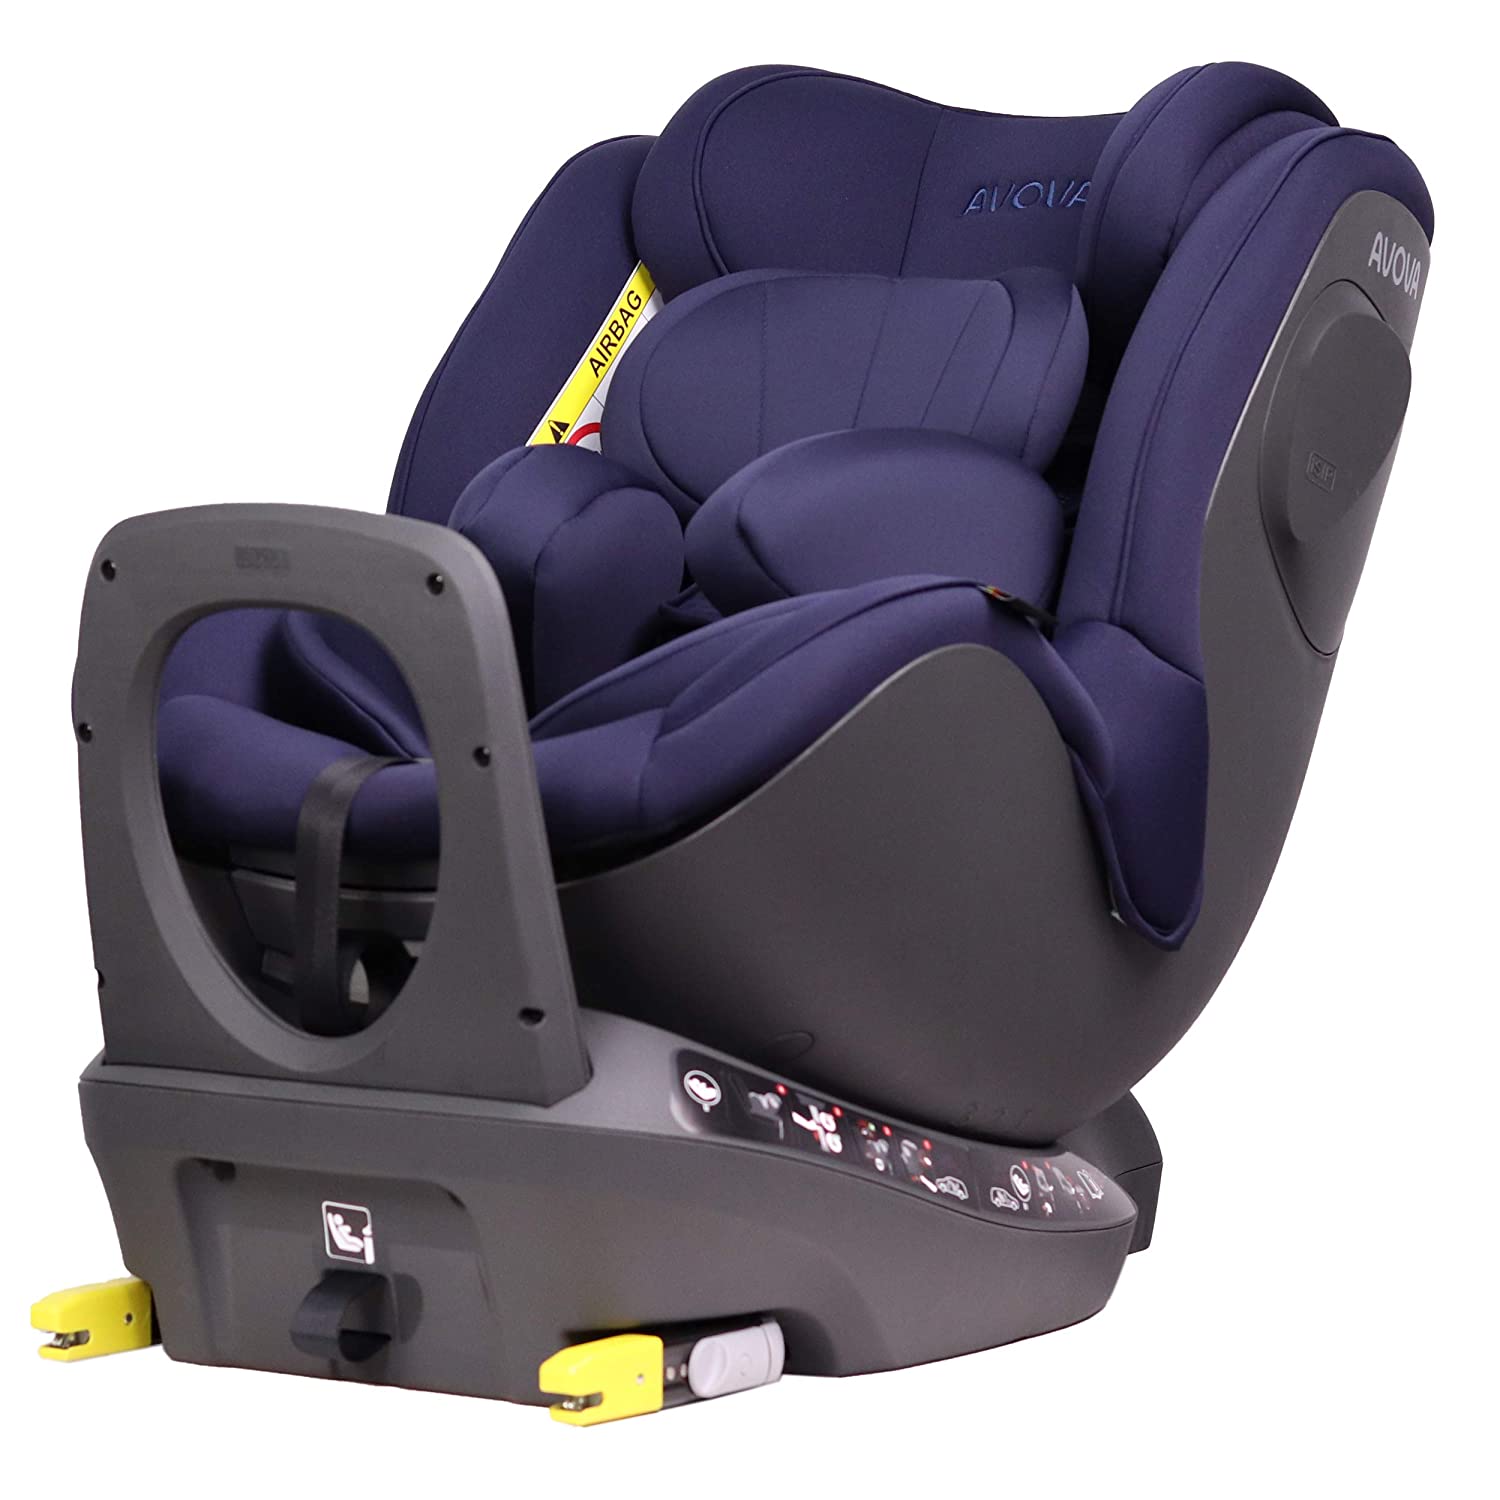 AVOVA Sperber-Fix i-Size Atlantic Blue Rotating Child Seat, Premium ISOFIX Child Seat, Group 0+, 1, Suitable for Children from Birth from 40 to 105 cm, Approx. 20 kg